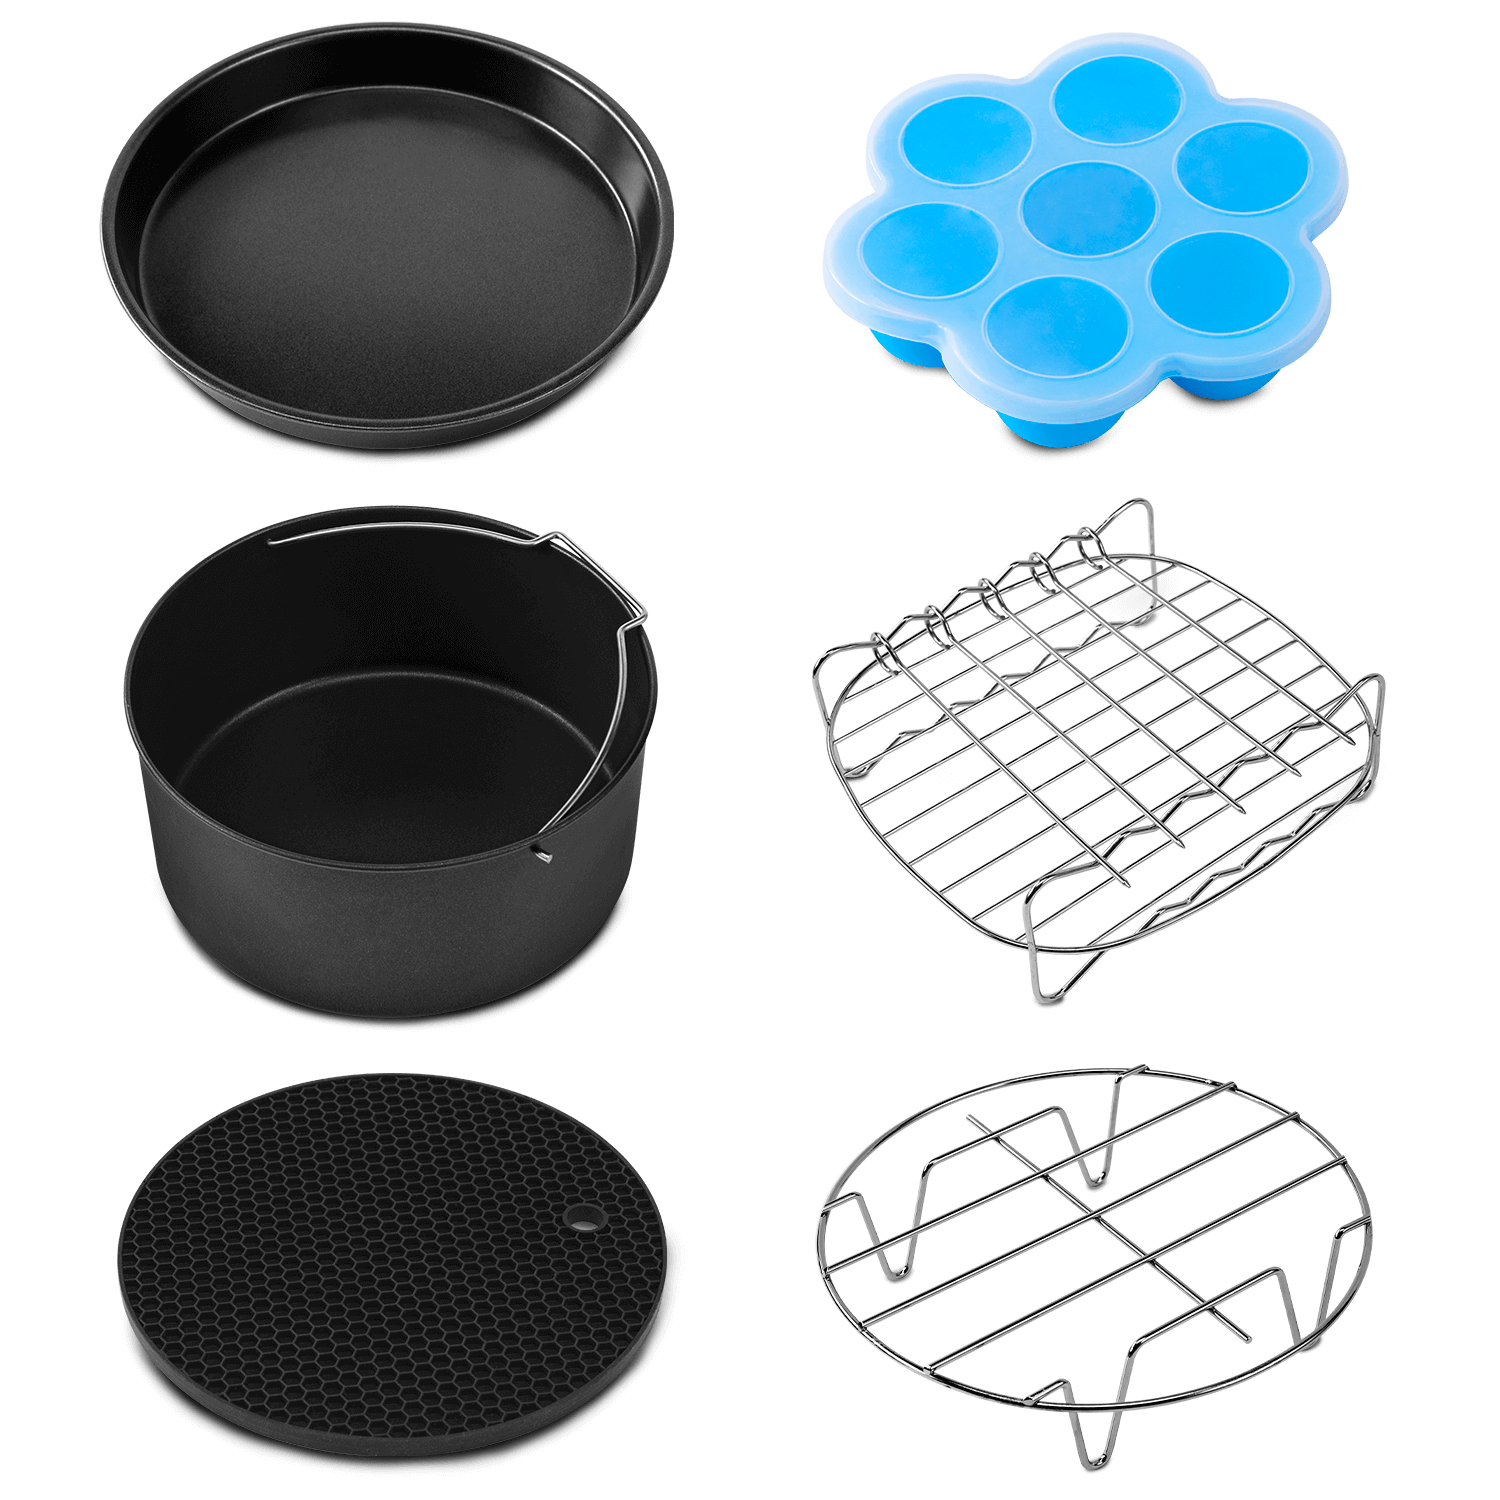 Air Fryer Rack, Guides, Liners and Cleaner Brush Accessories fits